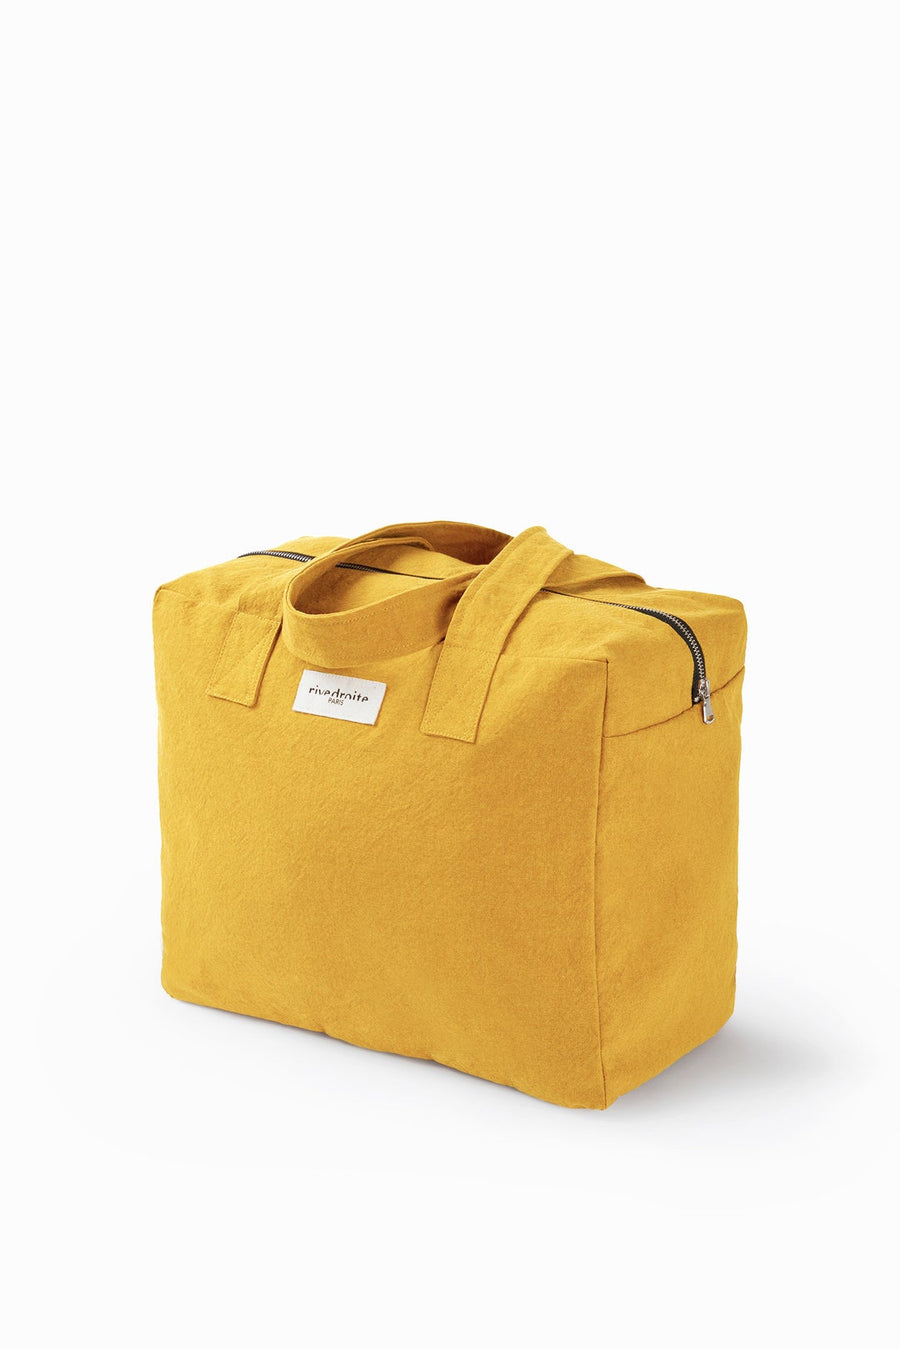 Celestins - The 24H Recycled Cotton Bag Mustard